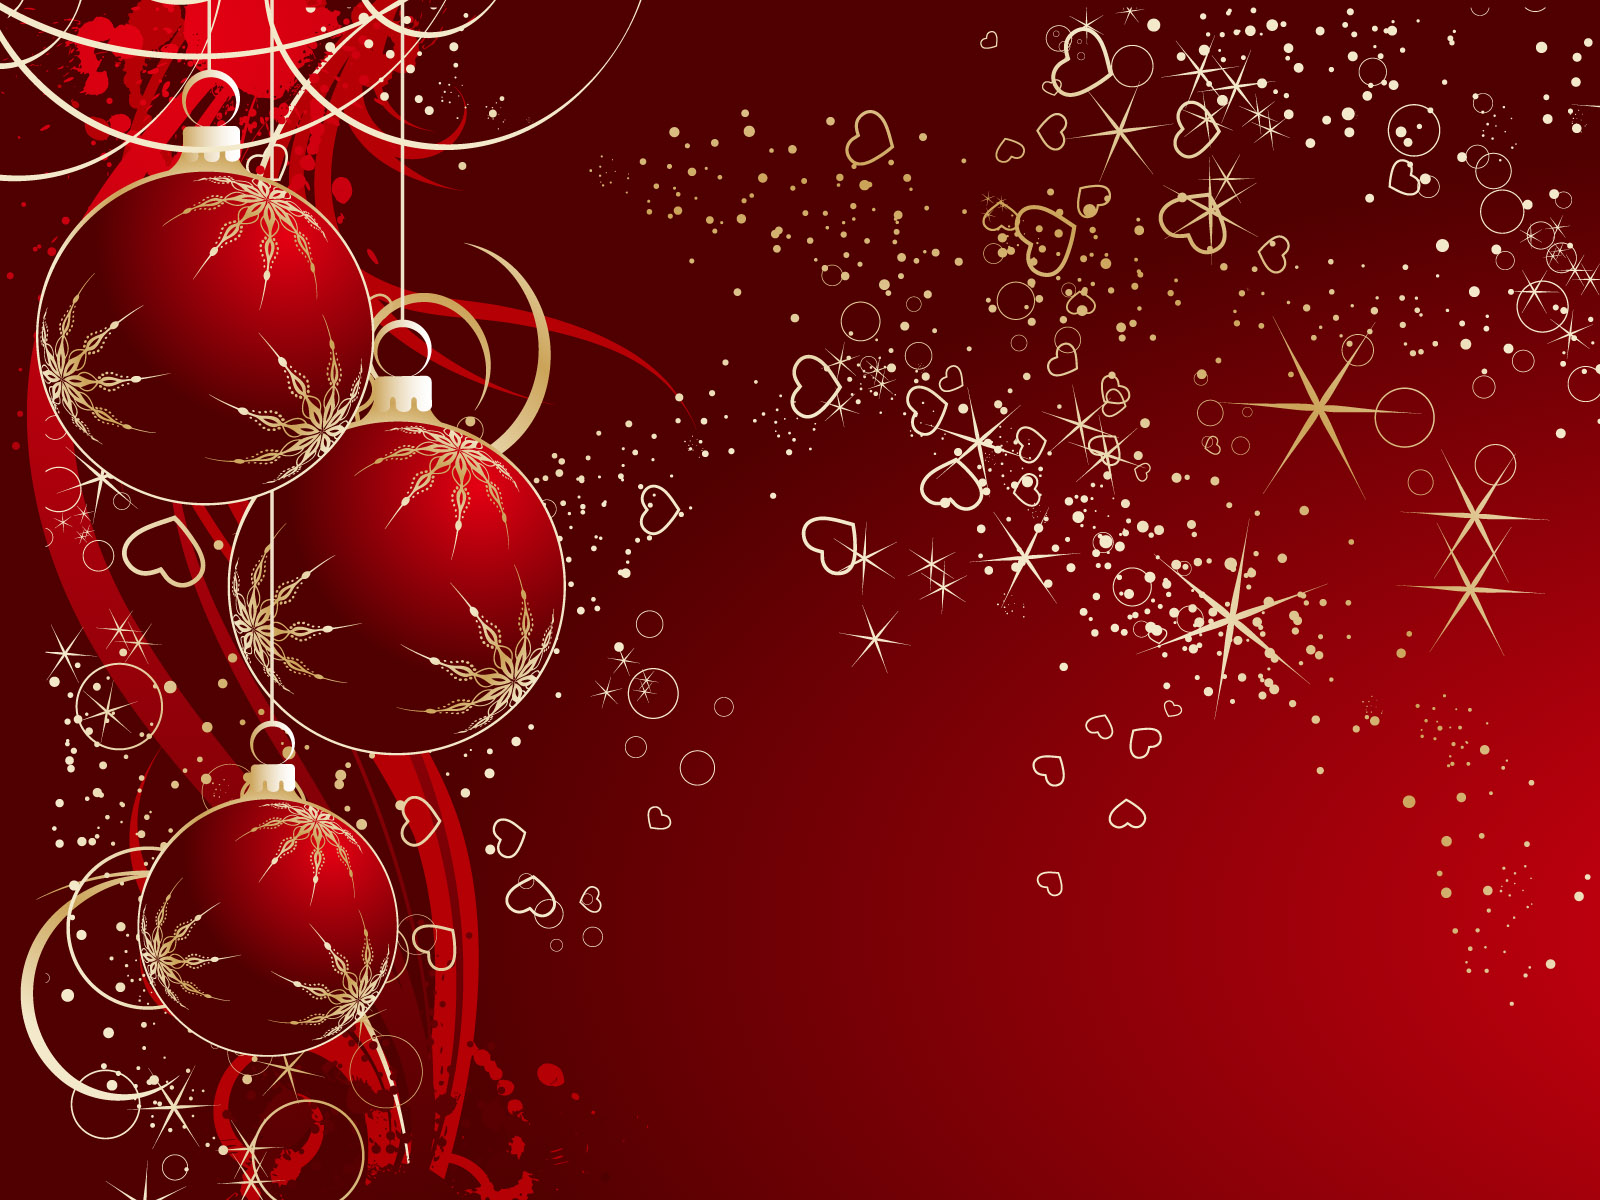 Abstract red and white Christmas wallpaper HD | Home of Wallpapers ...